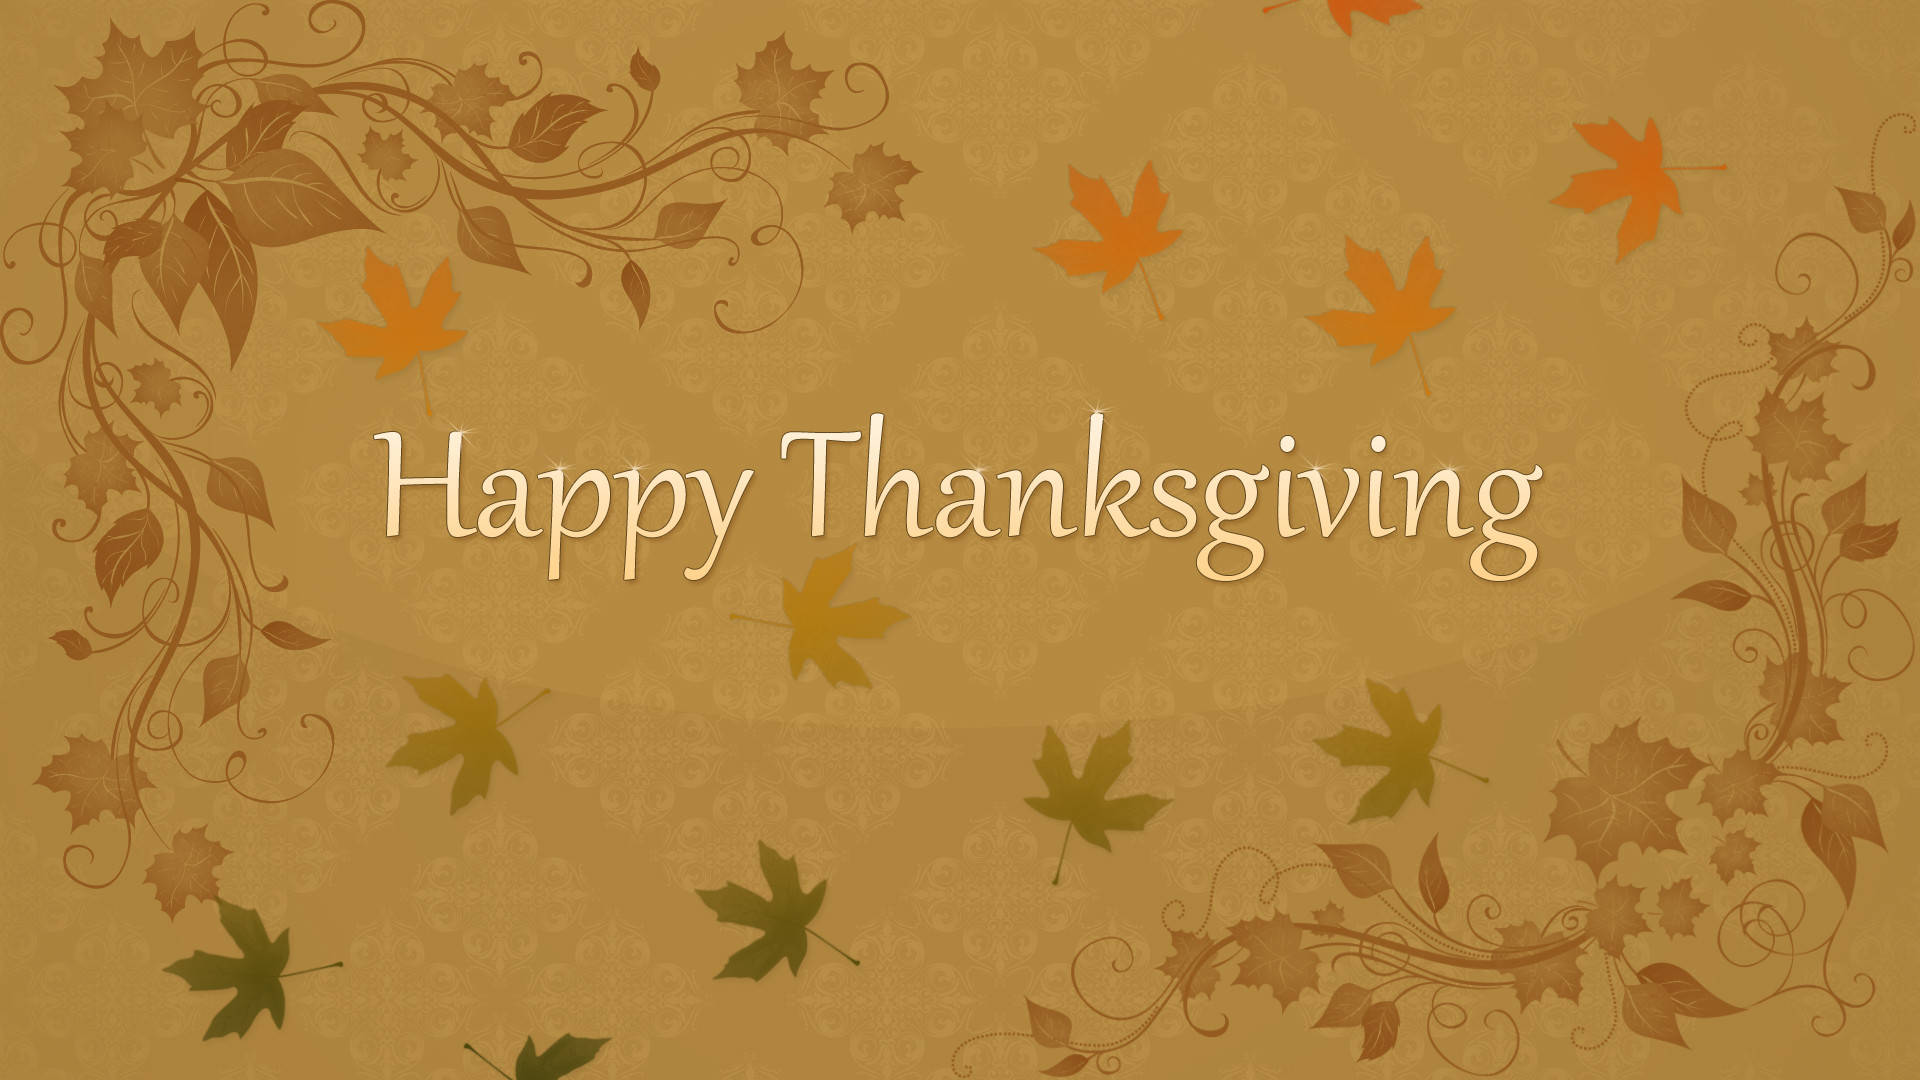 Happy Thanksgiving Day Message Background